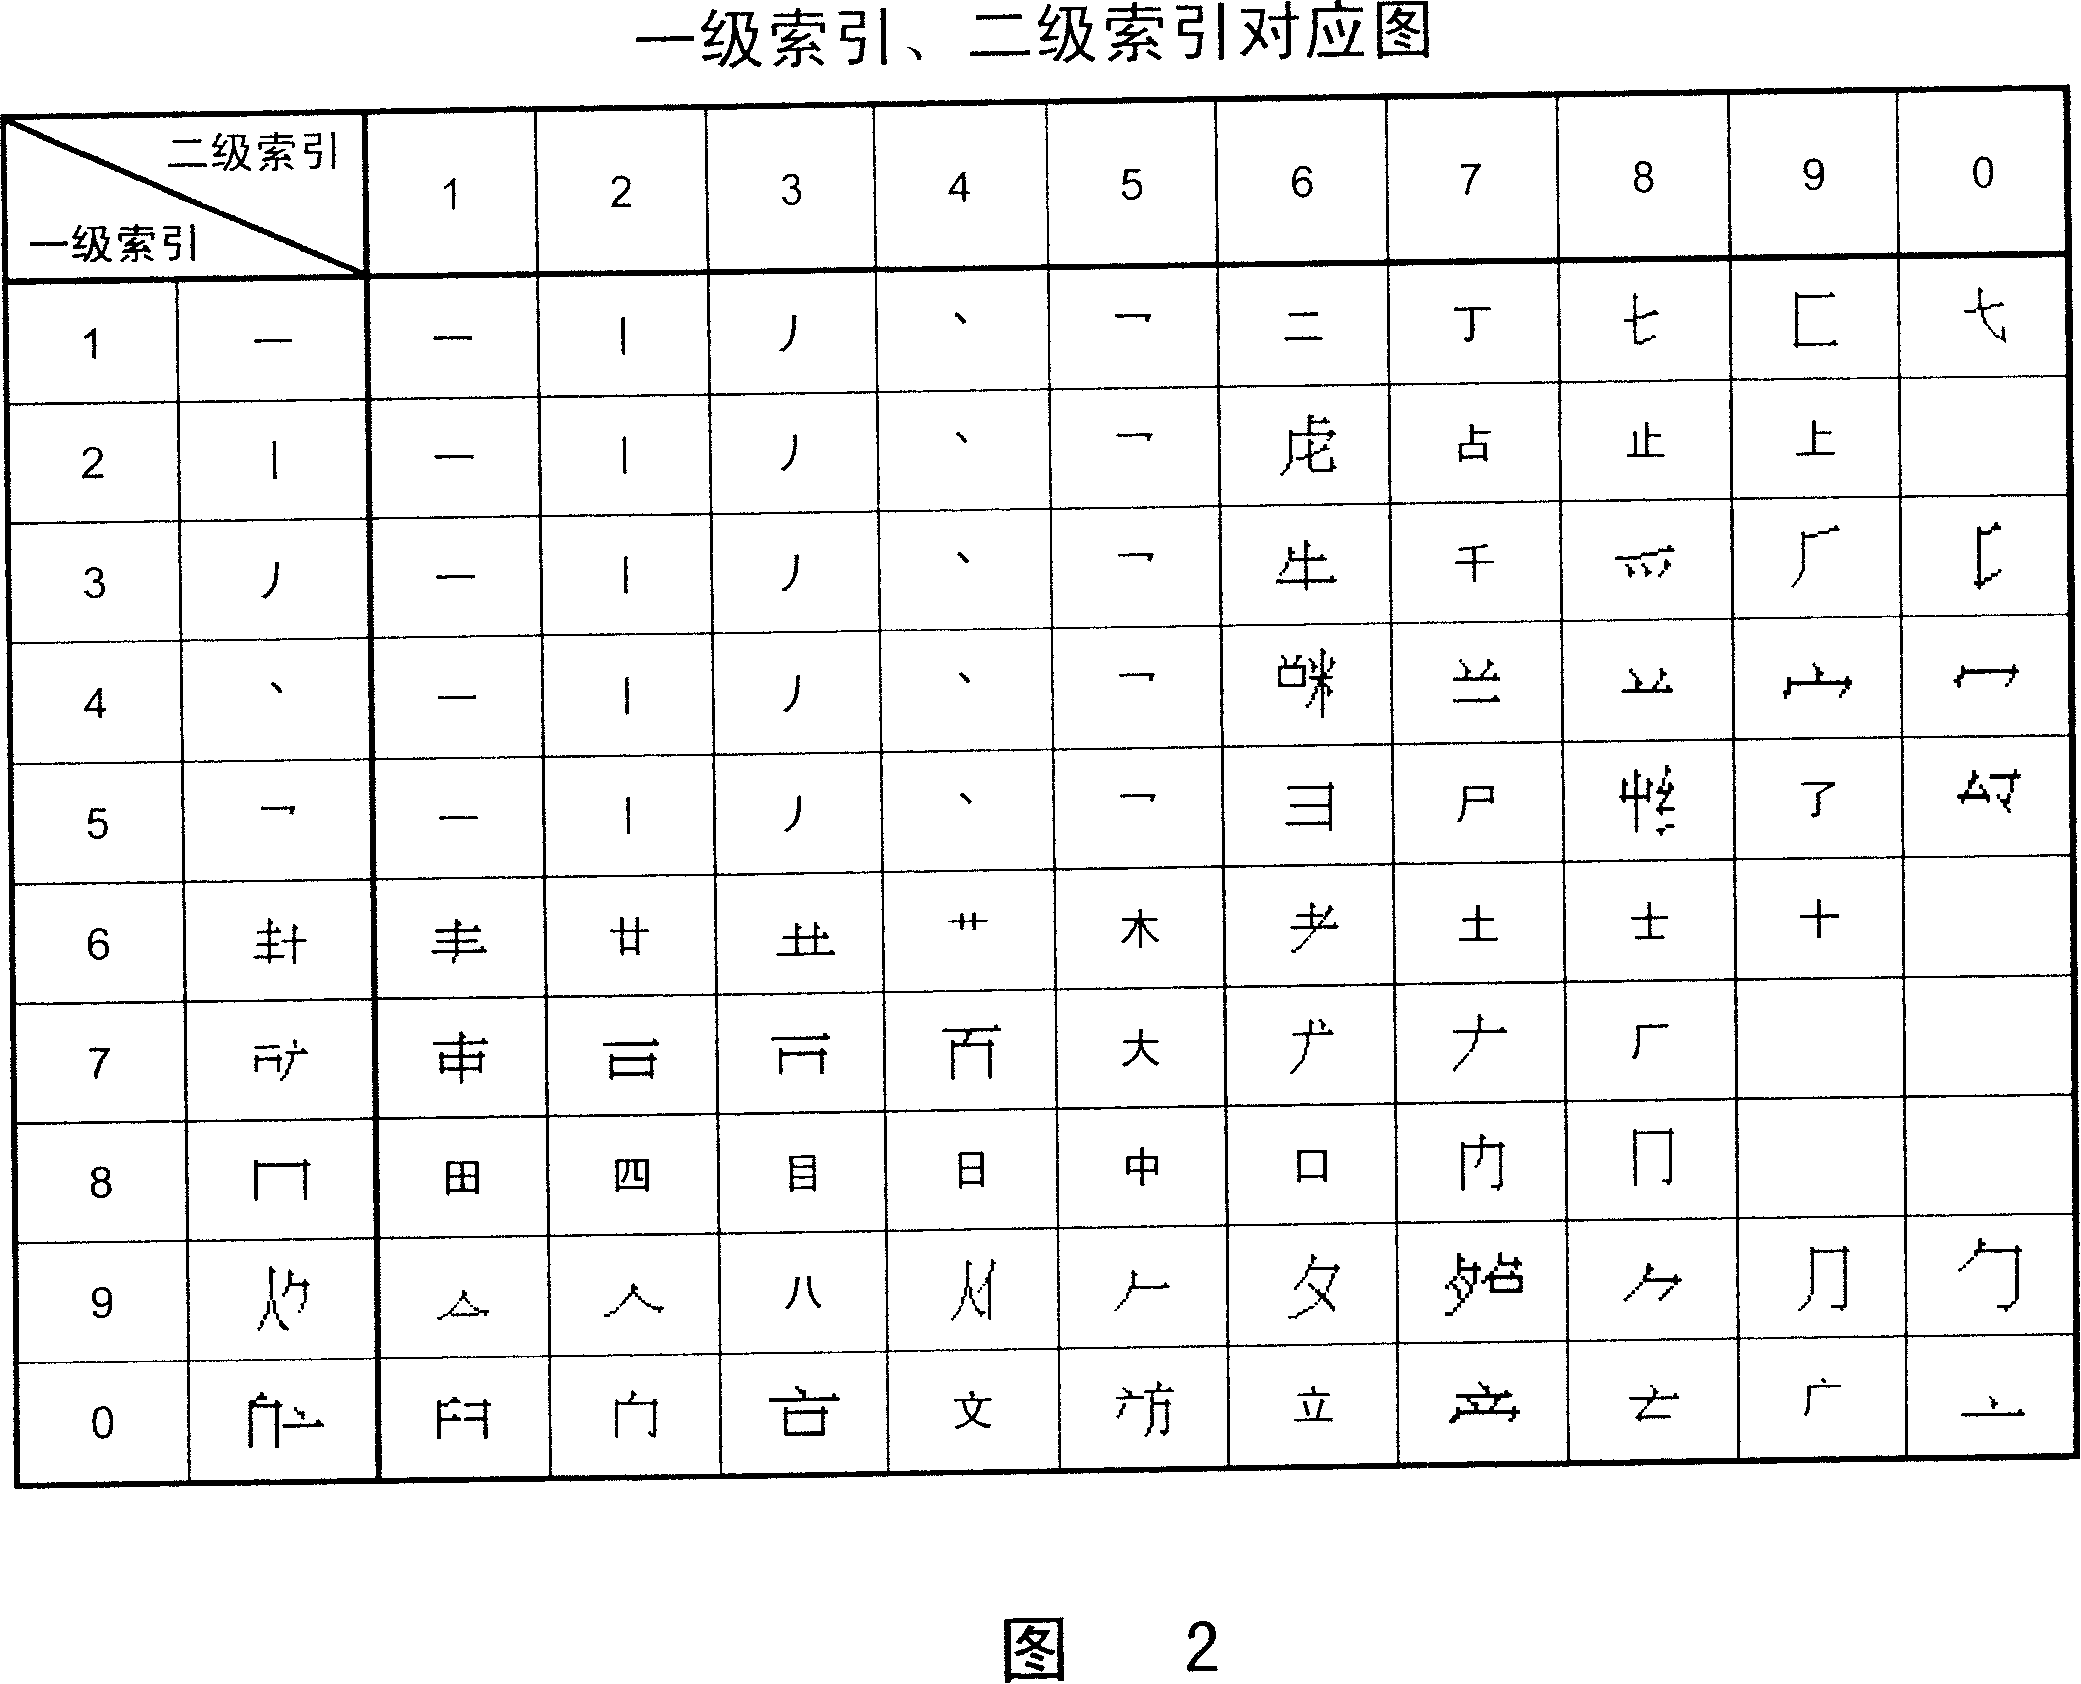 Chinese character image input method for digital electrical apparatus